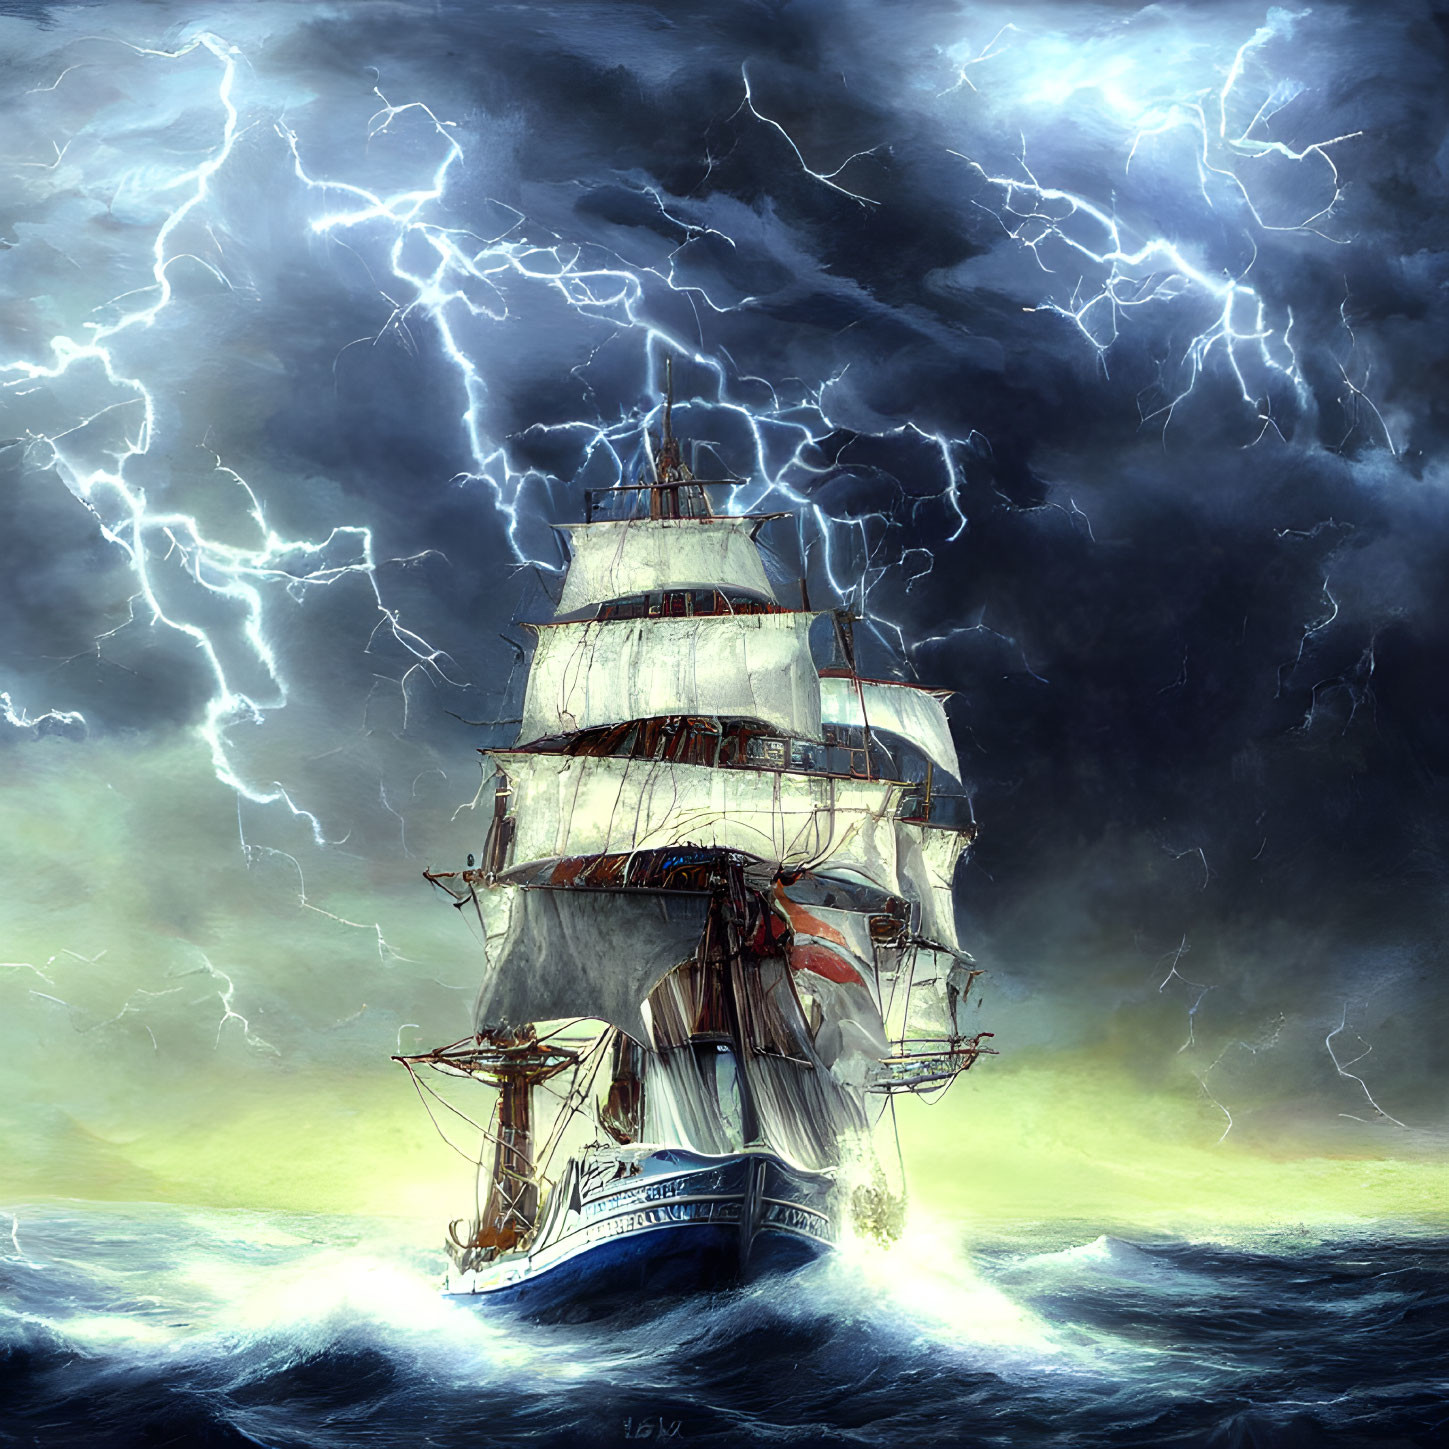 Tall ship with full sails in dramatic lightning storm